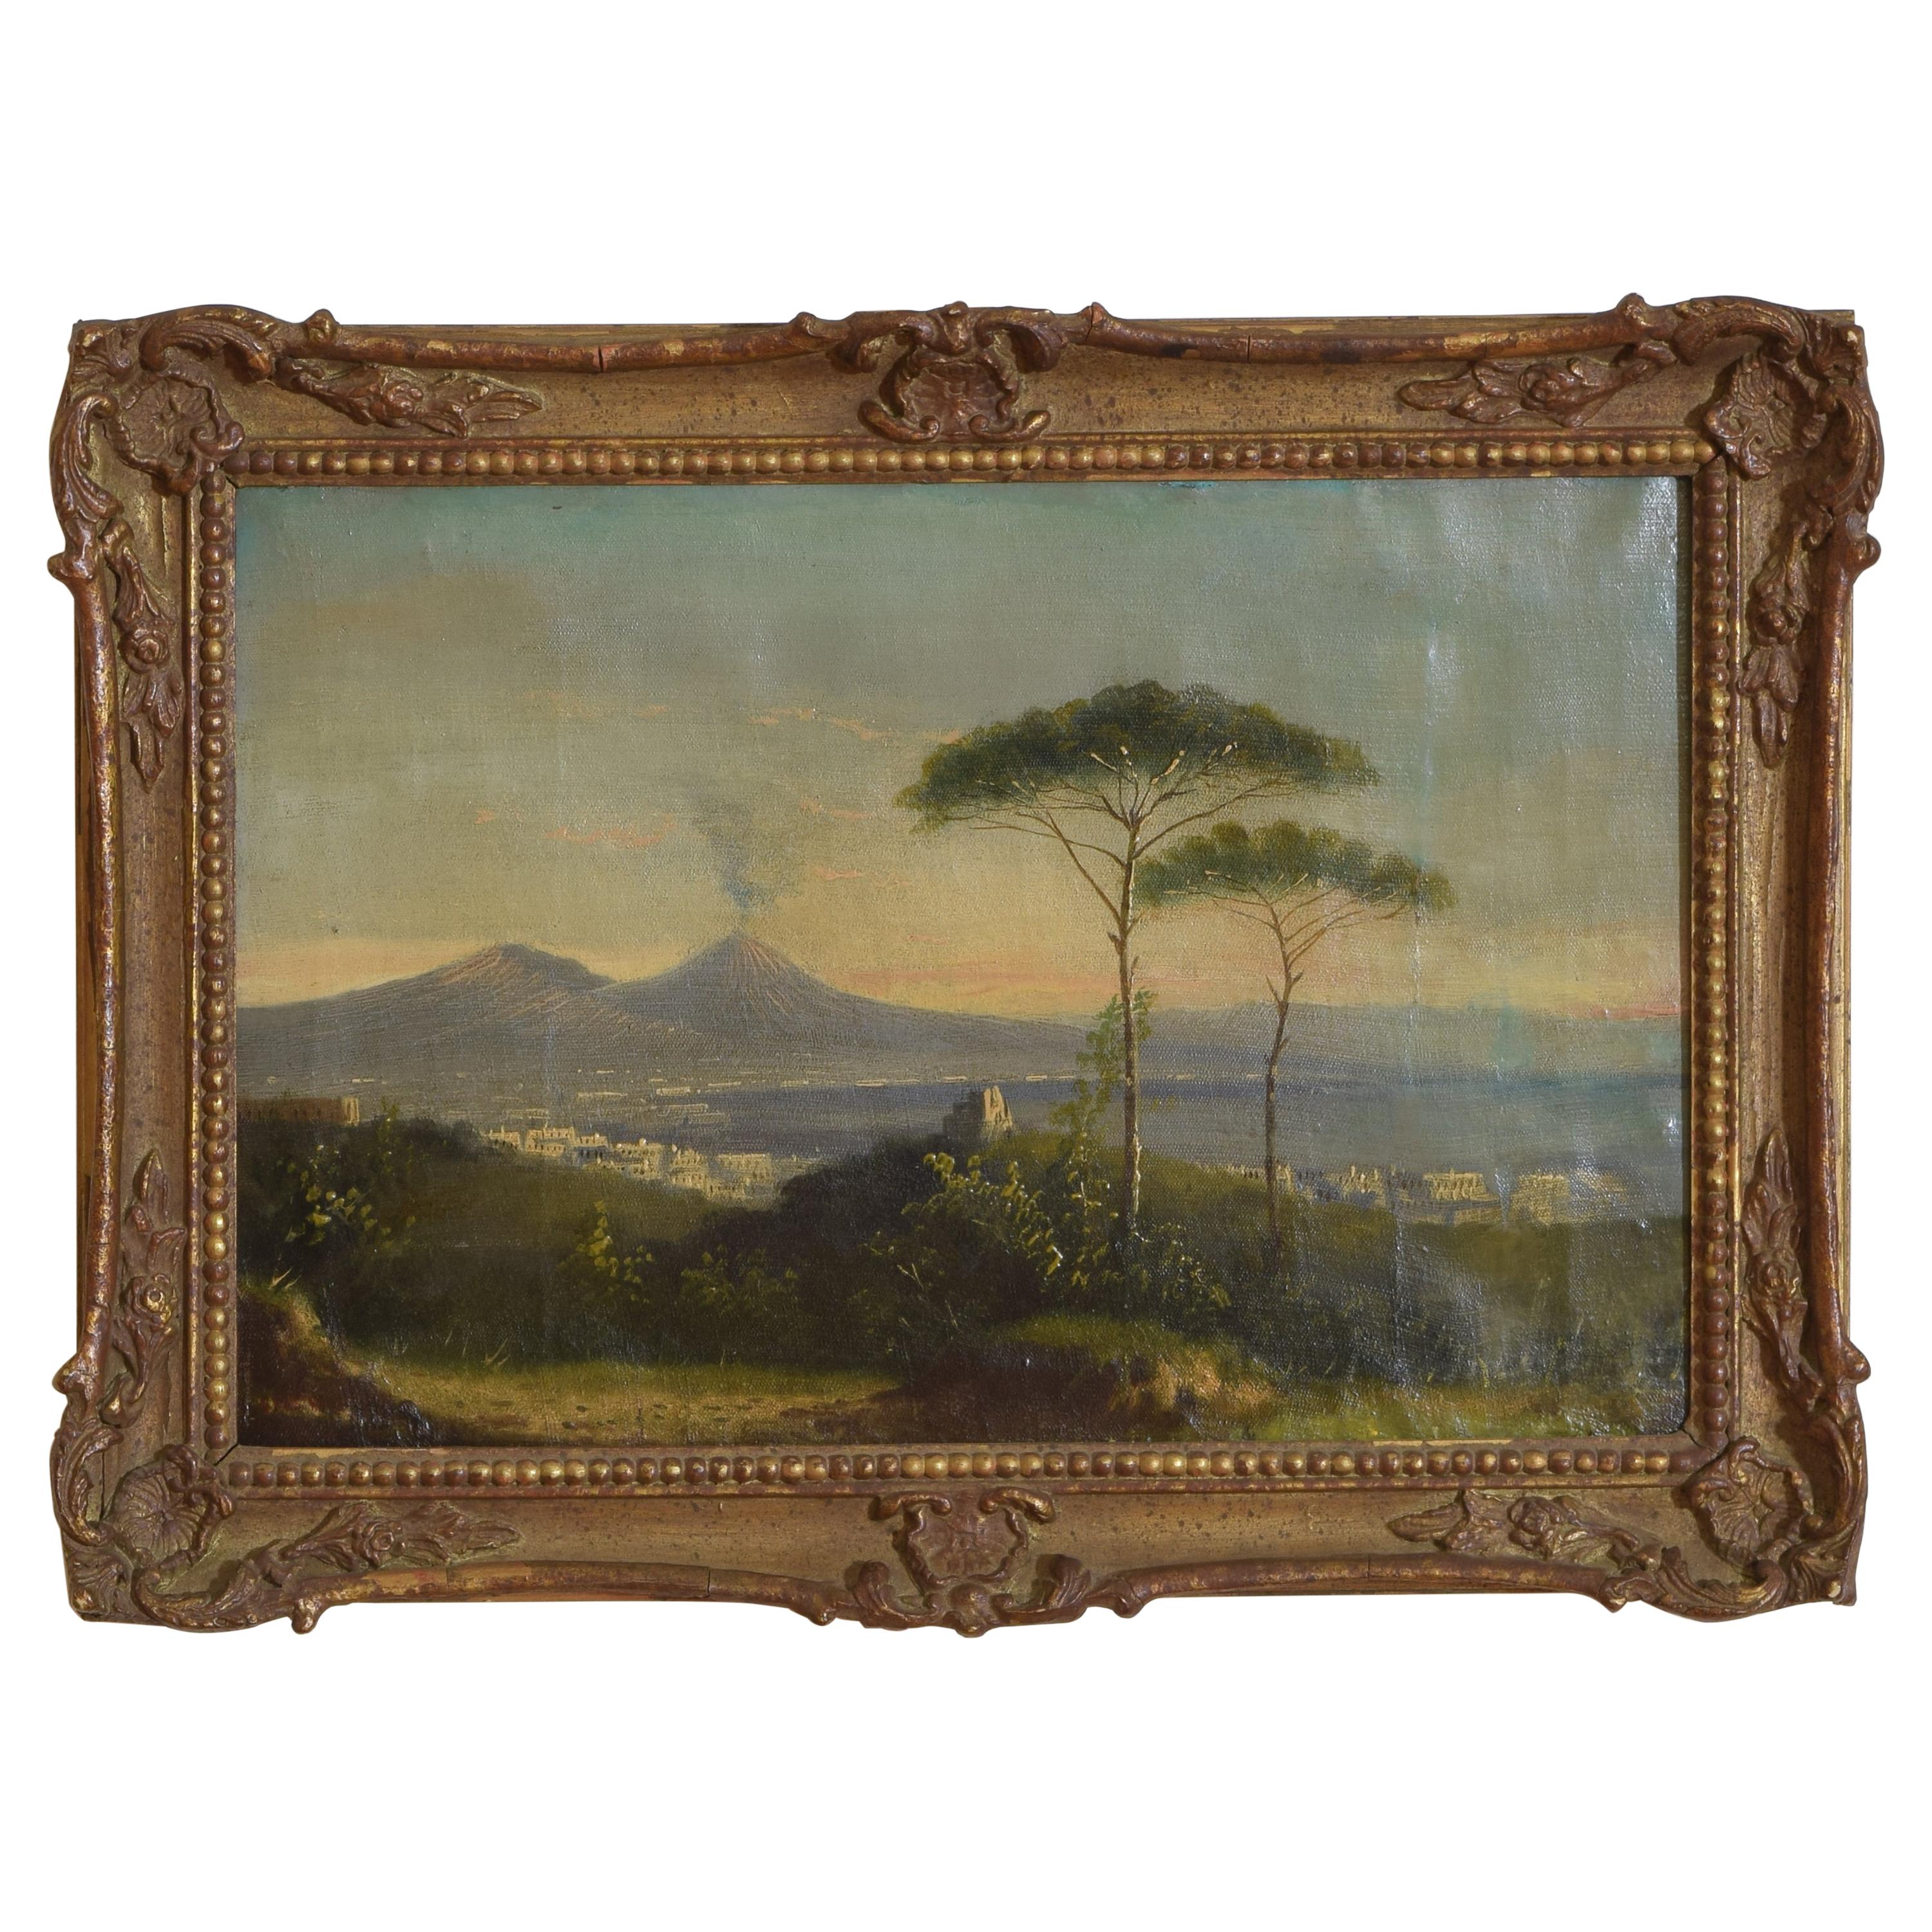 Oil on Canvas, "View of Vesuvius", Signed D. Stewart, 1866